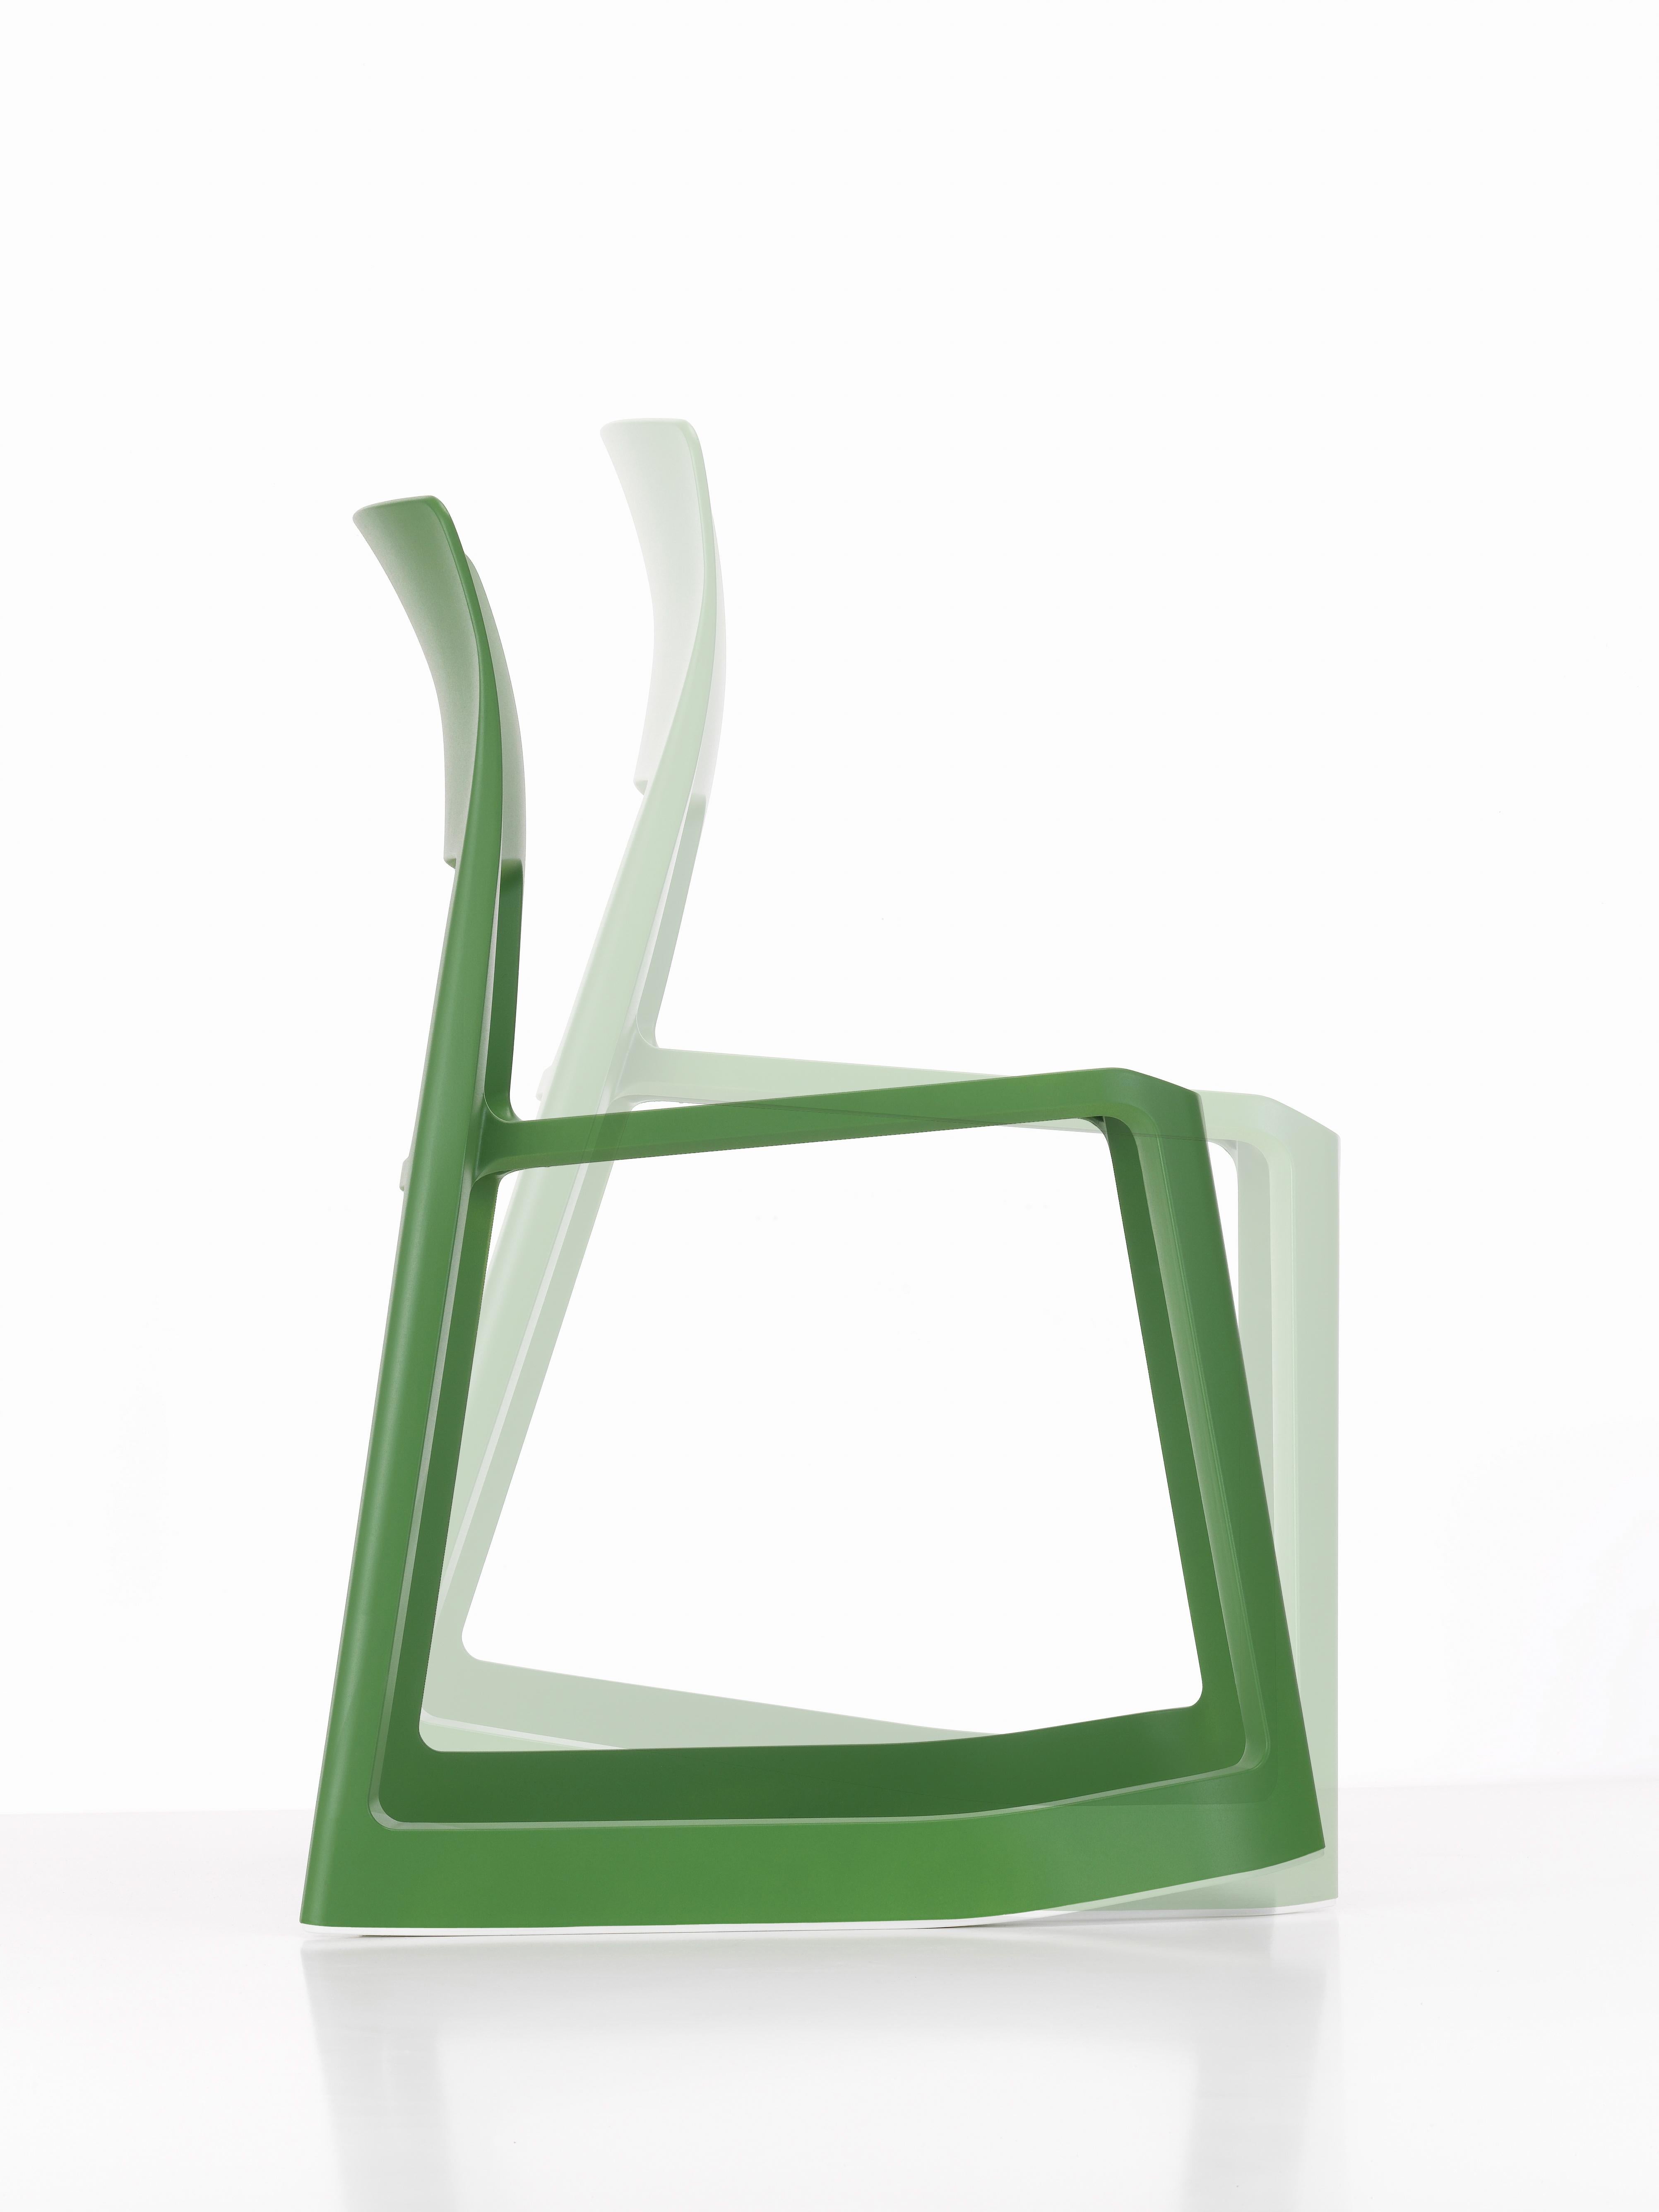 Tip ton defines a whole new chair typology: the solid plastic chair with forward-tilt action. Its name refers to the characteristic dual sitting postures, from a normal position, tip ton can be tilted forward a few degrees where the chair then stays